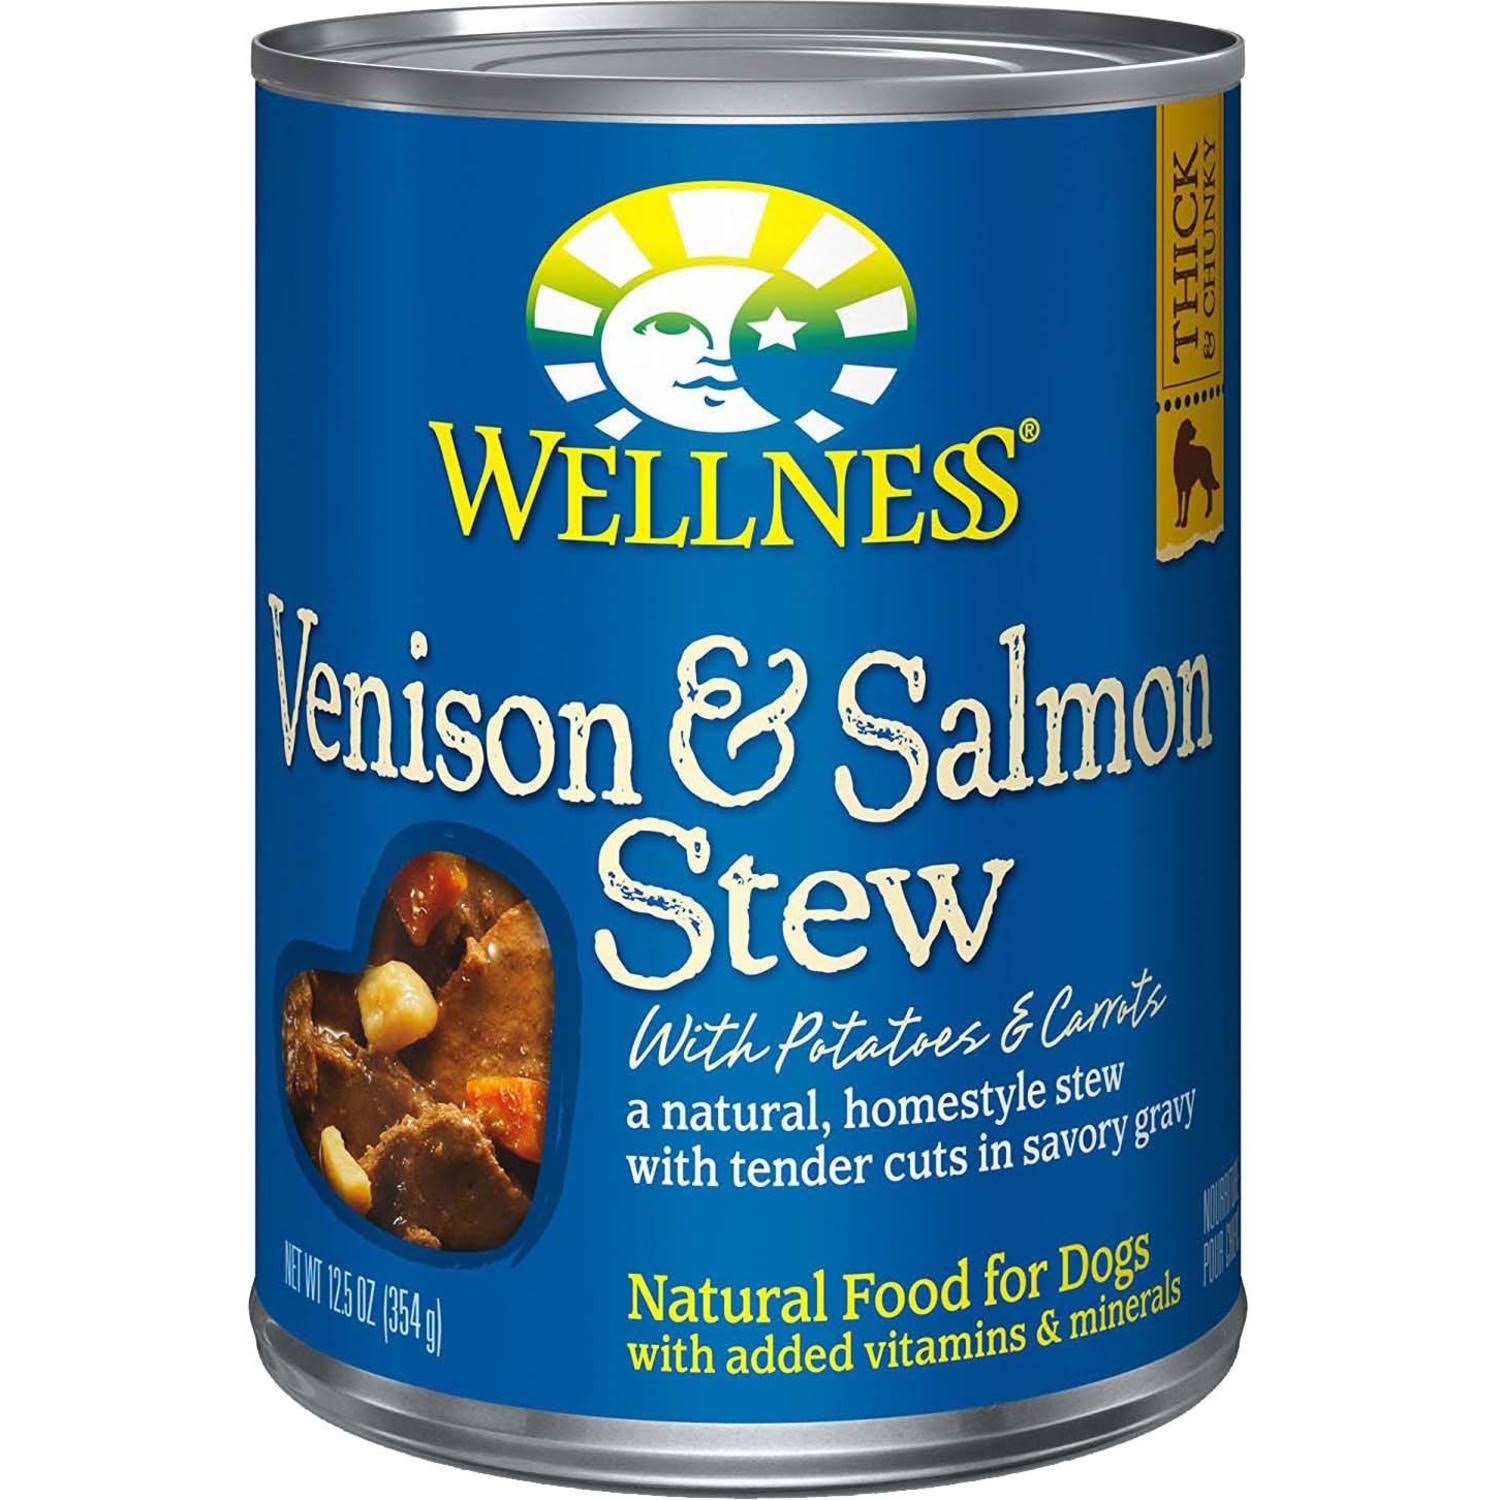 Wellness Natural Food for Dogs - Venison & Salmon Stew with Potatoes Carrots